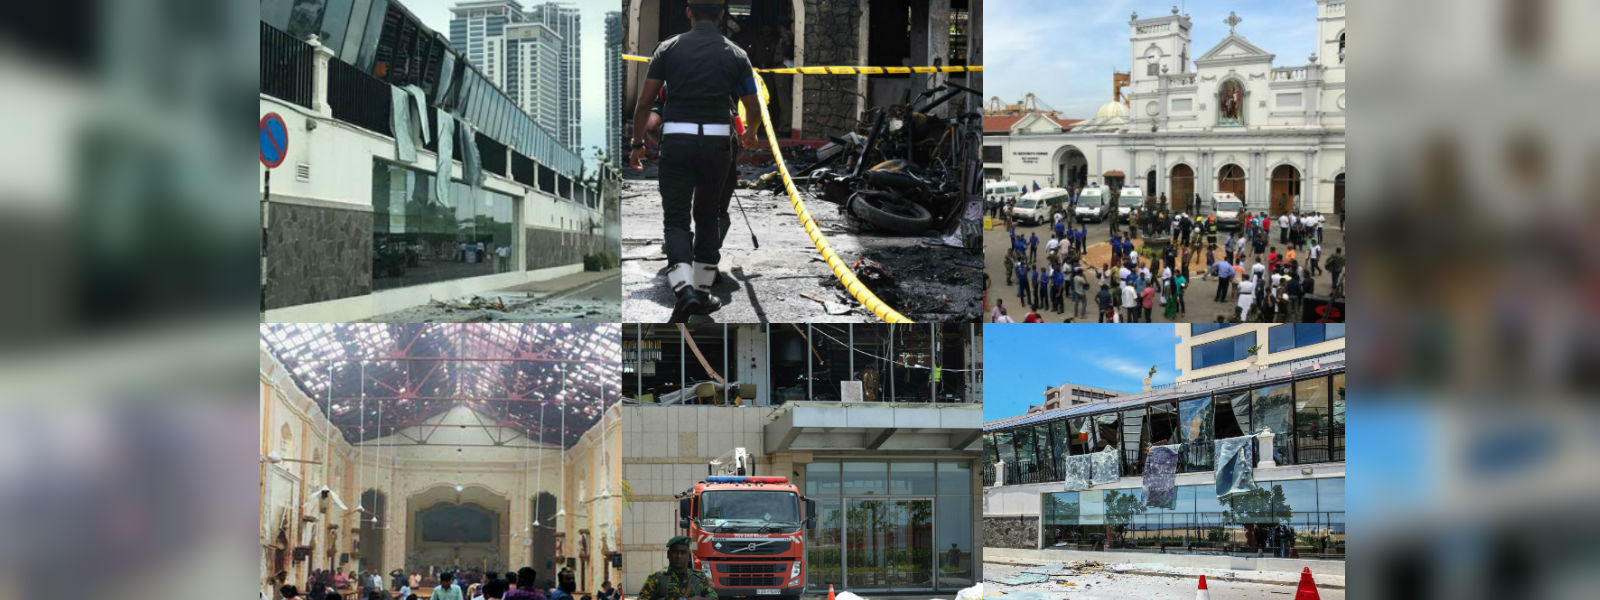 04/21 attacks: Over 100 suspects detained